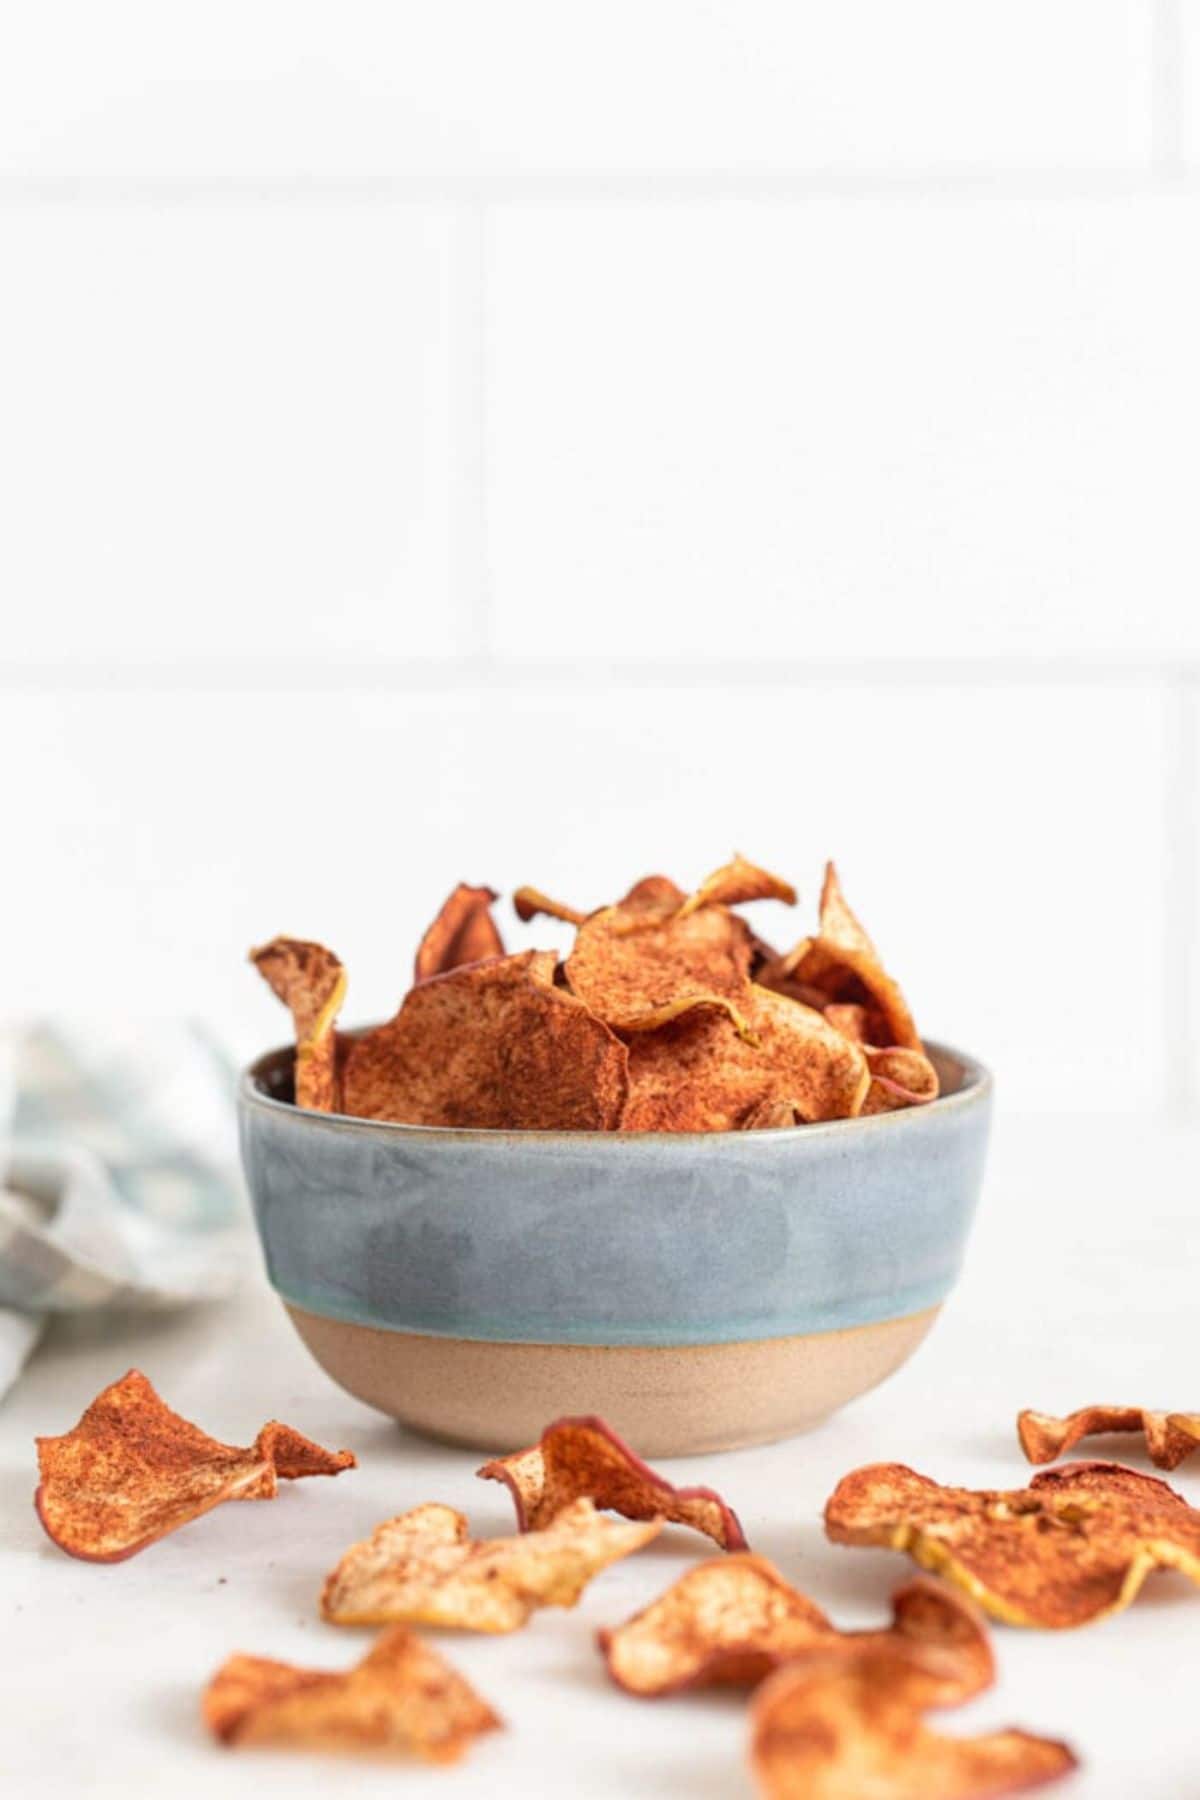 a ceramic bowl of baked chips. apple chips are scattered around the bowl